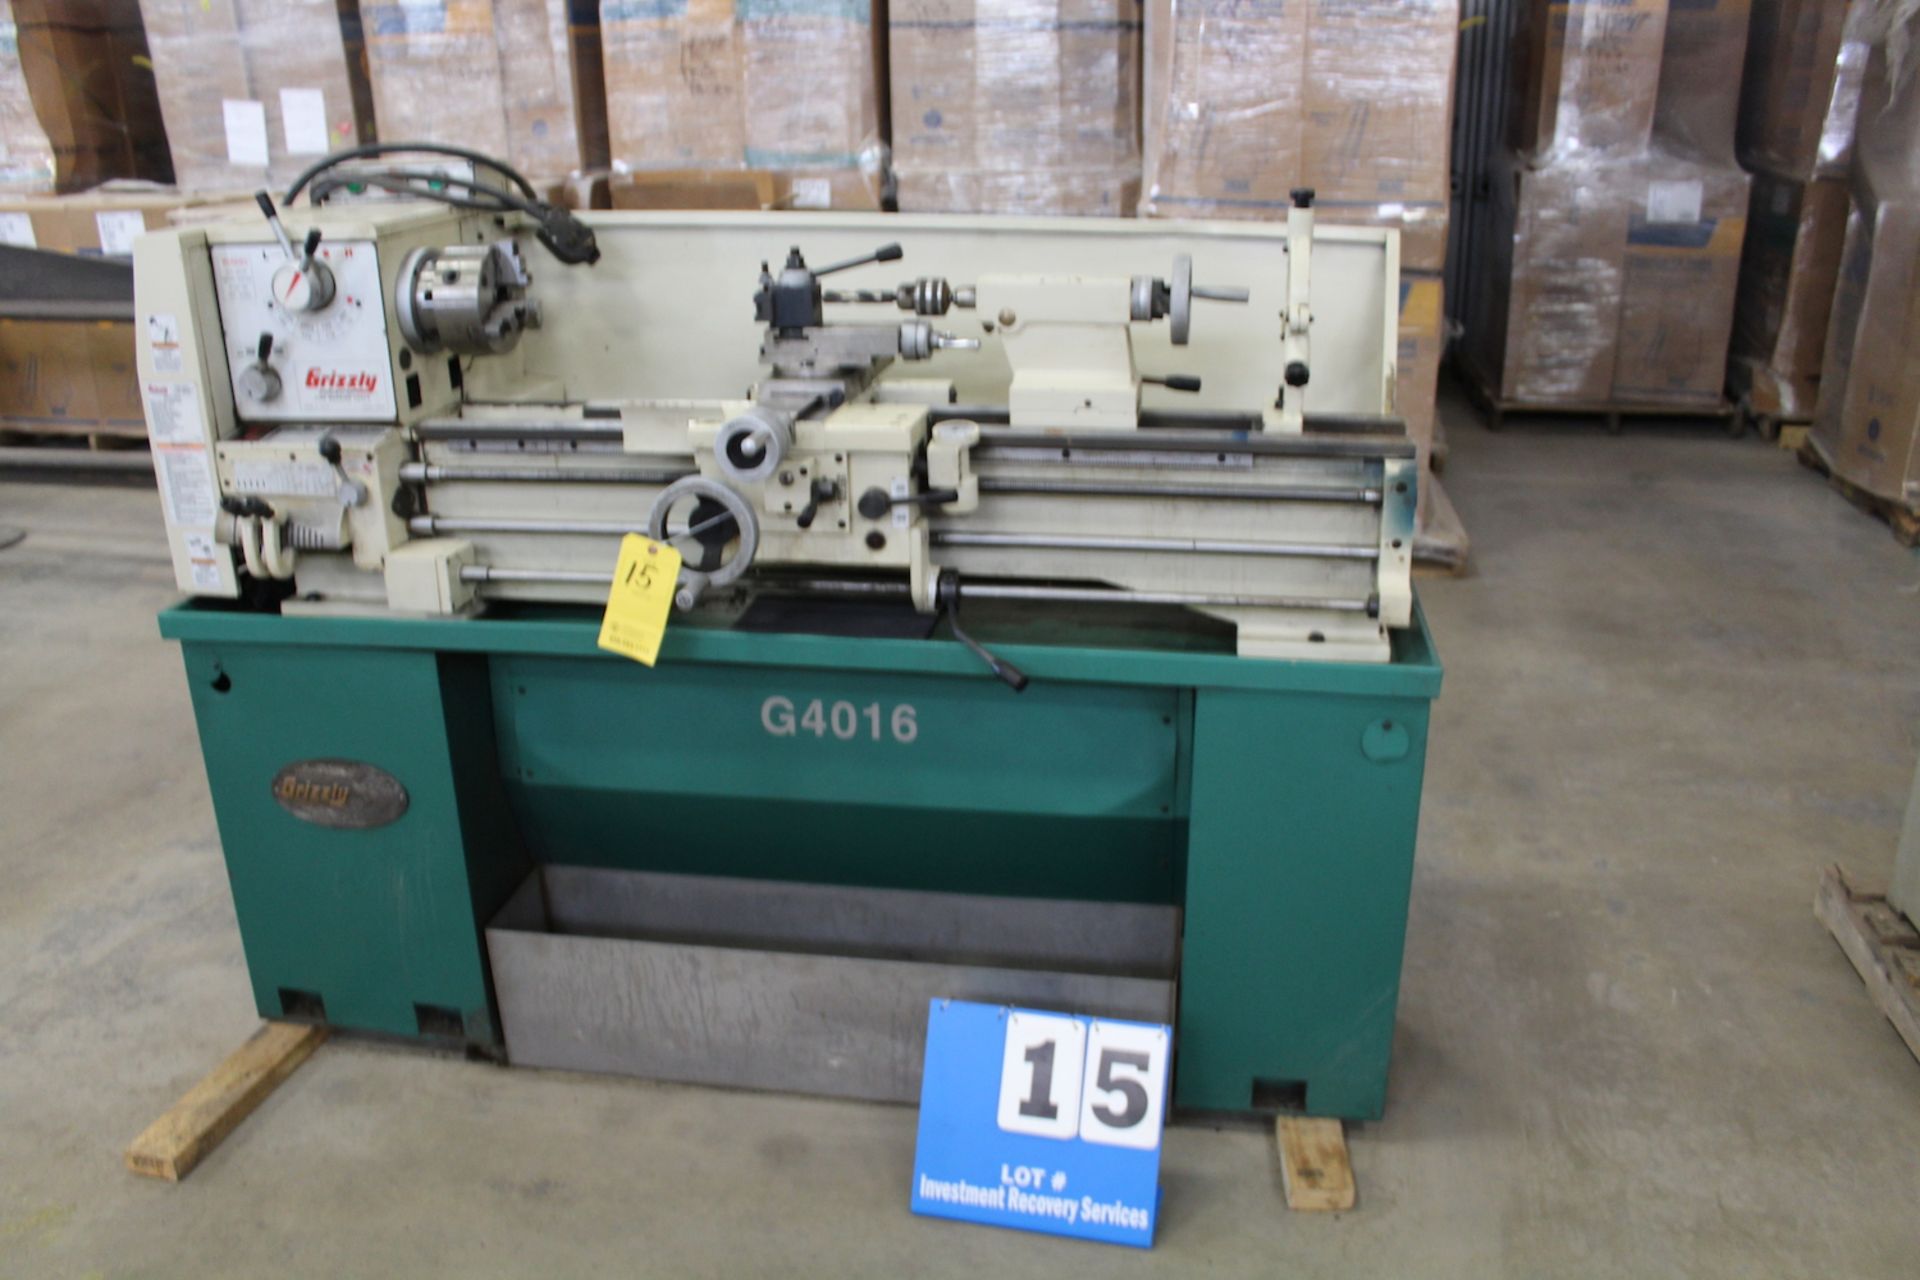 GRIZZLY ENGINE LATHE, MDL:G4016, 1/2" SPINDLE BORE, 55" BED, 6" 3 JAW CHUCK, TOOL POST, TAILSTOCK,